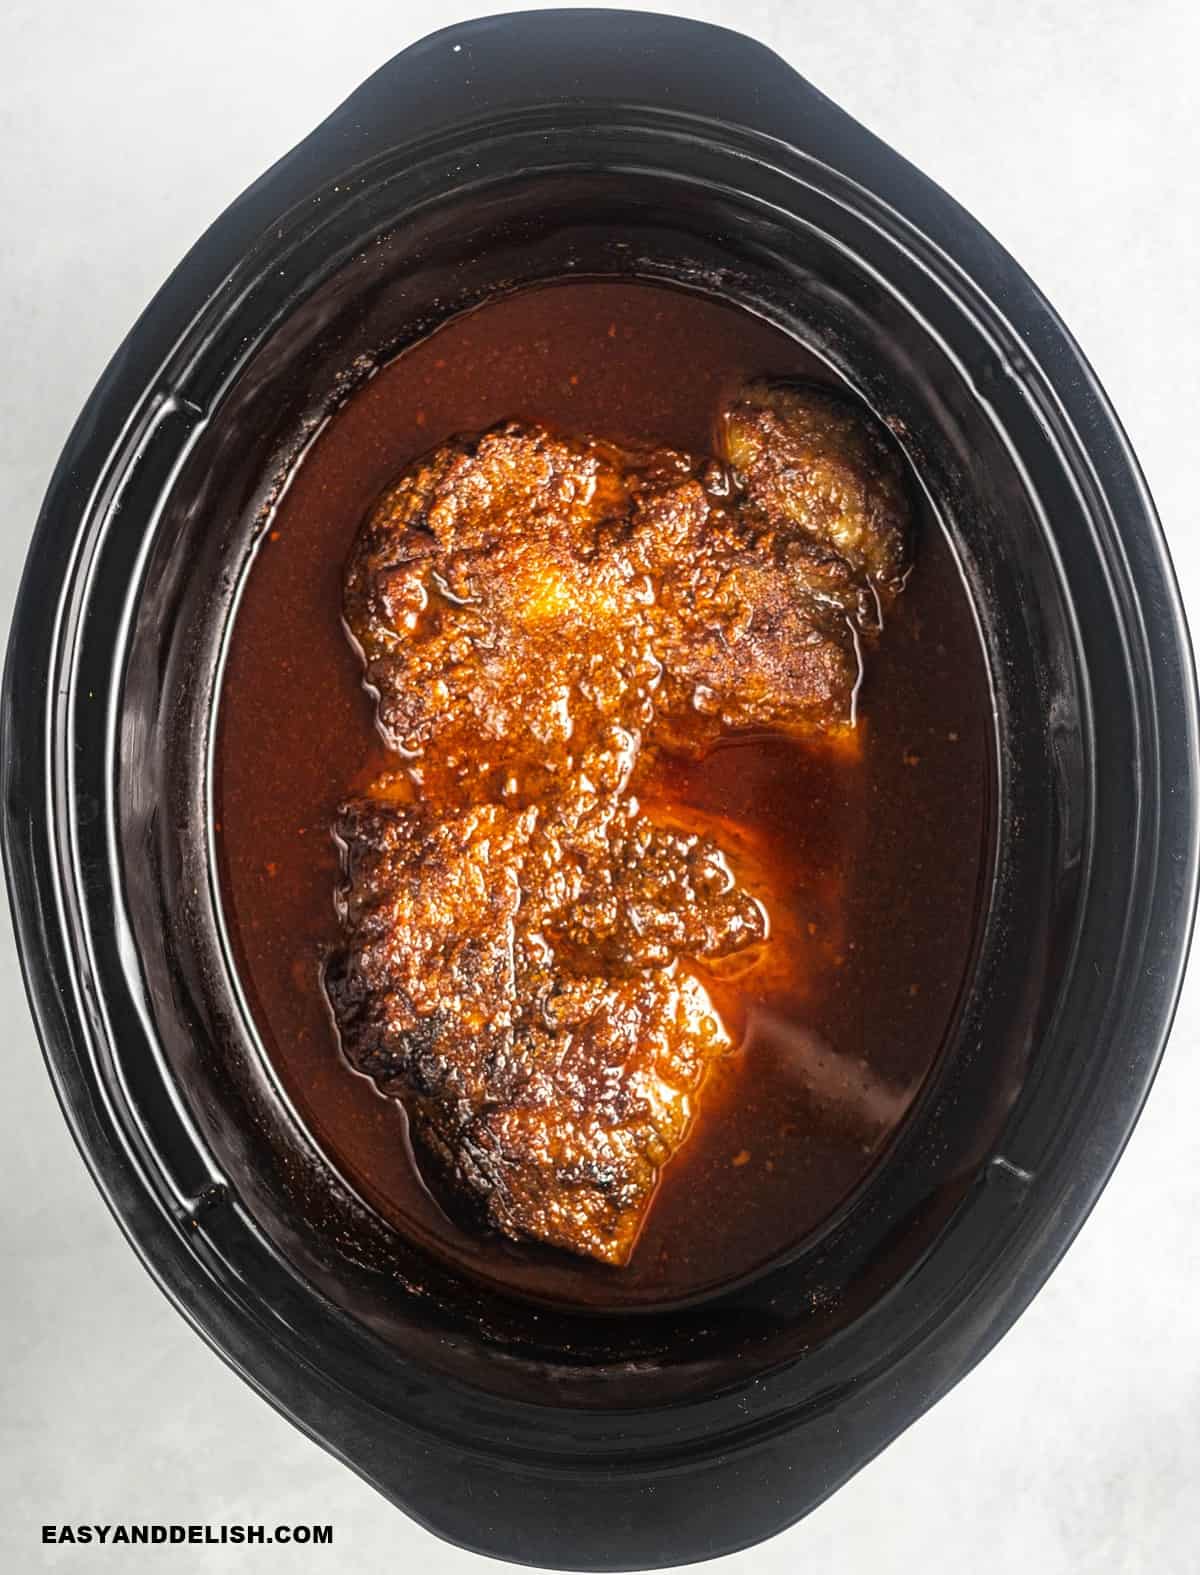 slow cooked beef brisket and its juices in a crockpot.